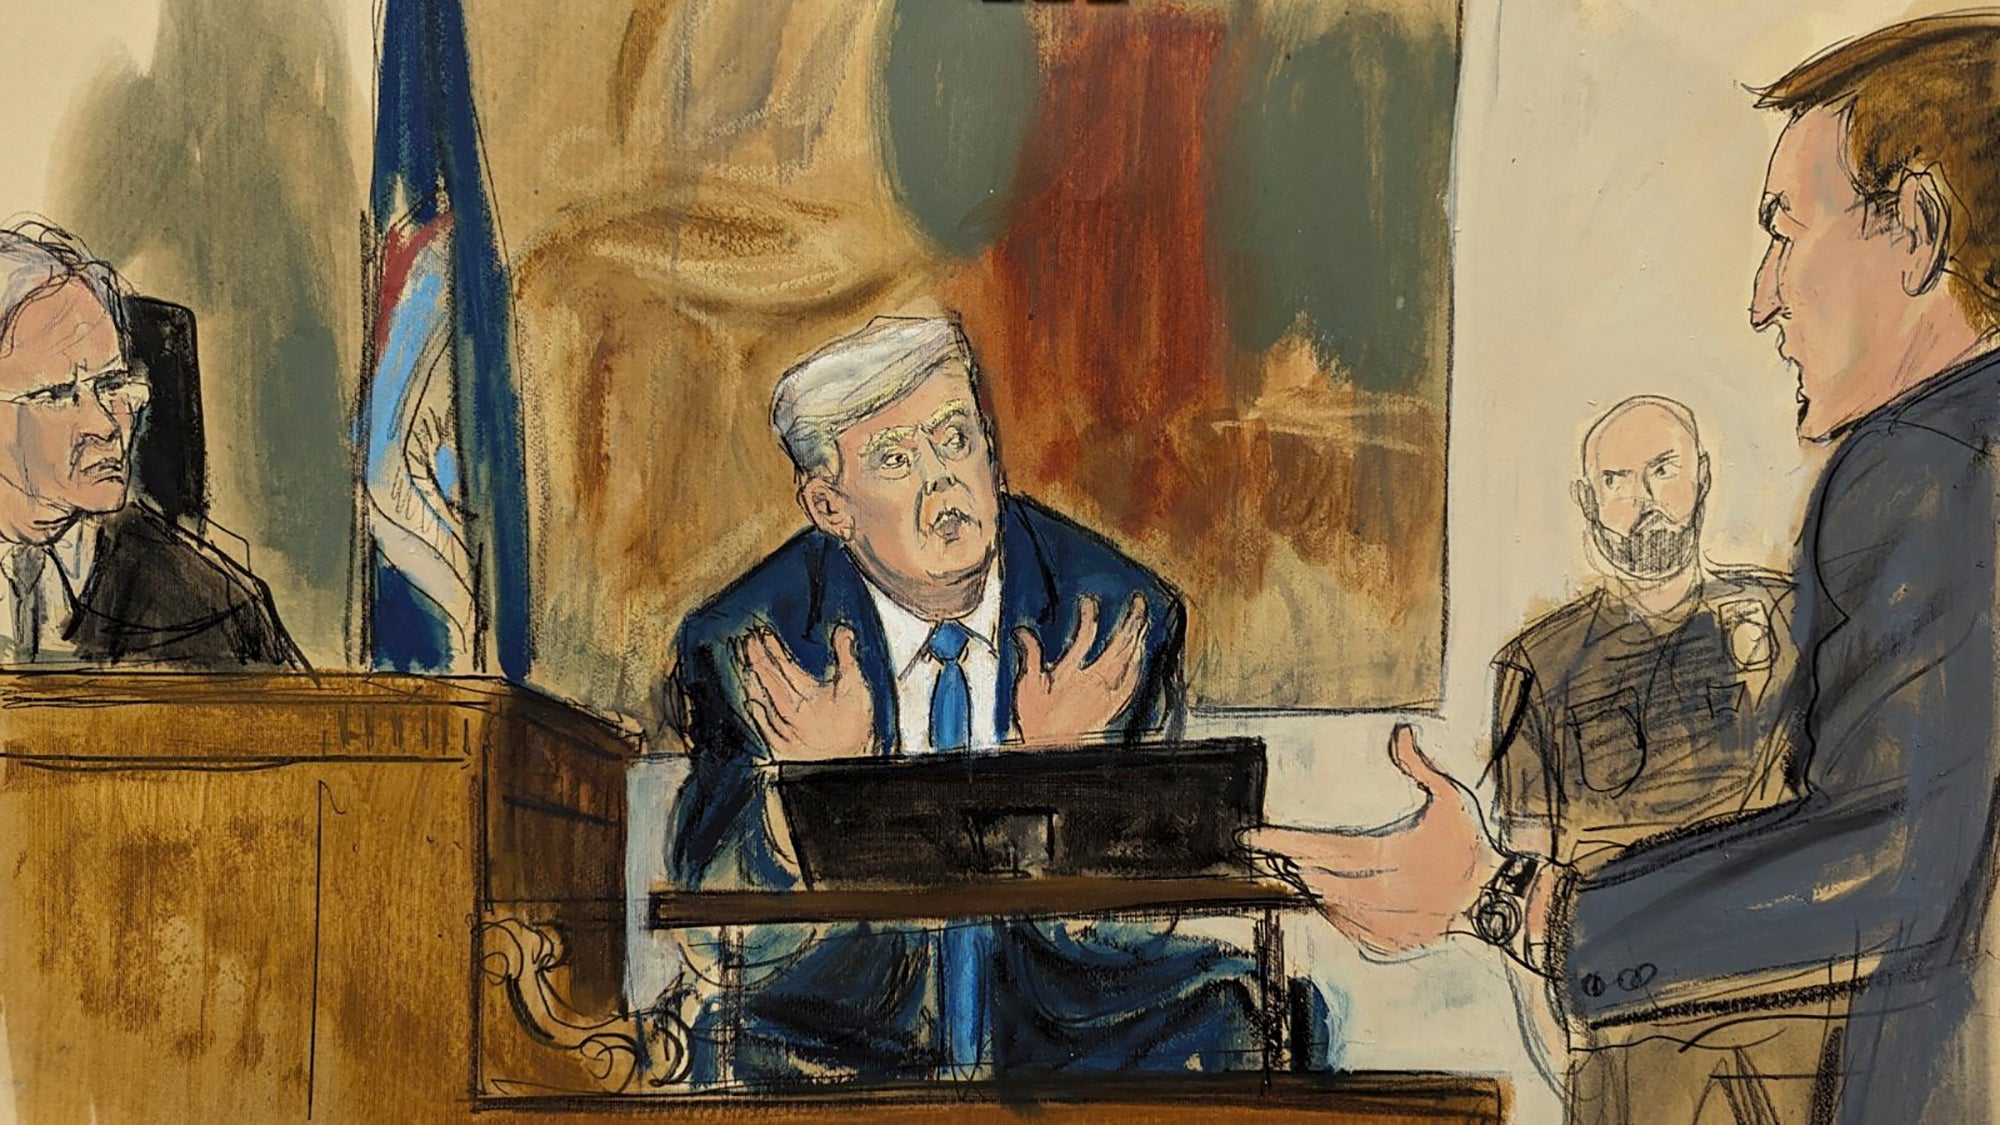 A courtroom sketch depicts Donald Trump on the witness stand during his testimony under questioning from counsel with the office of New York Attorney General on 6 November